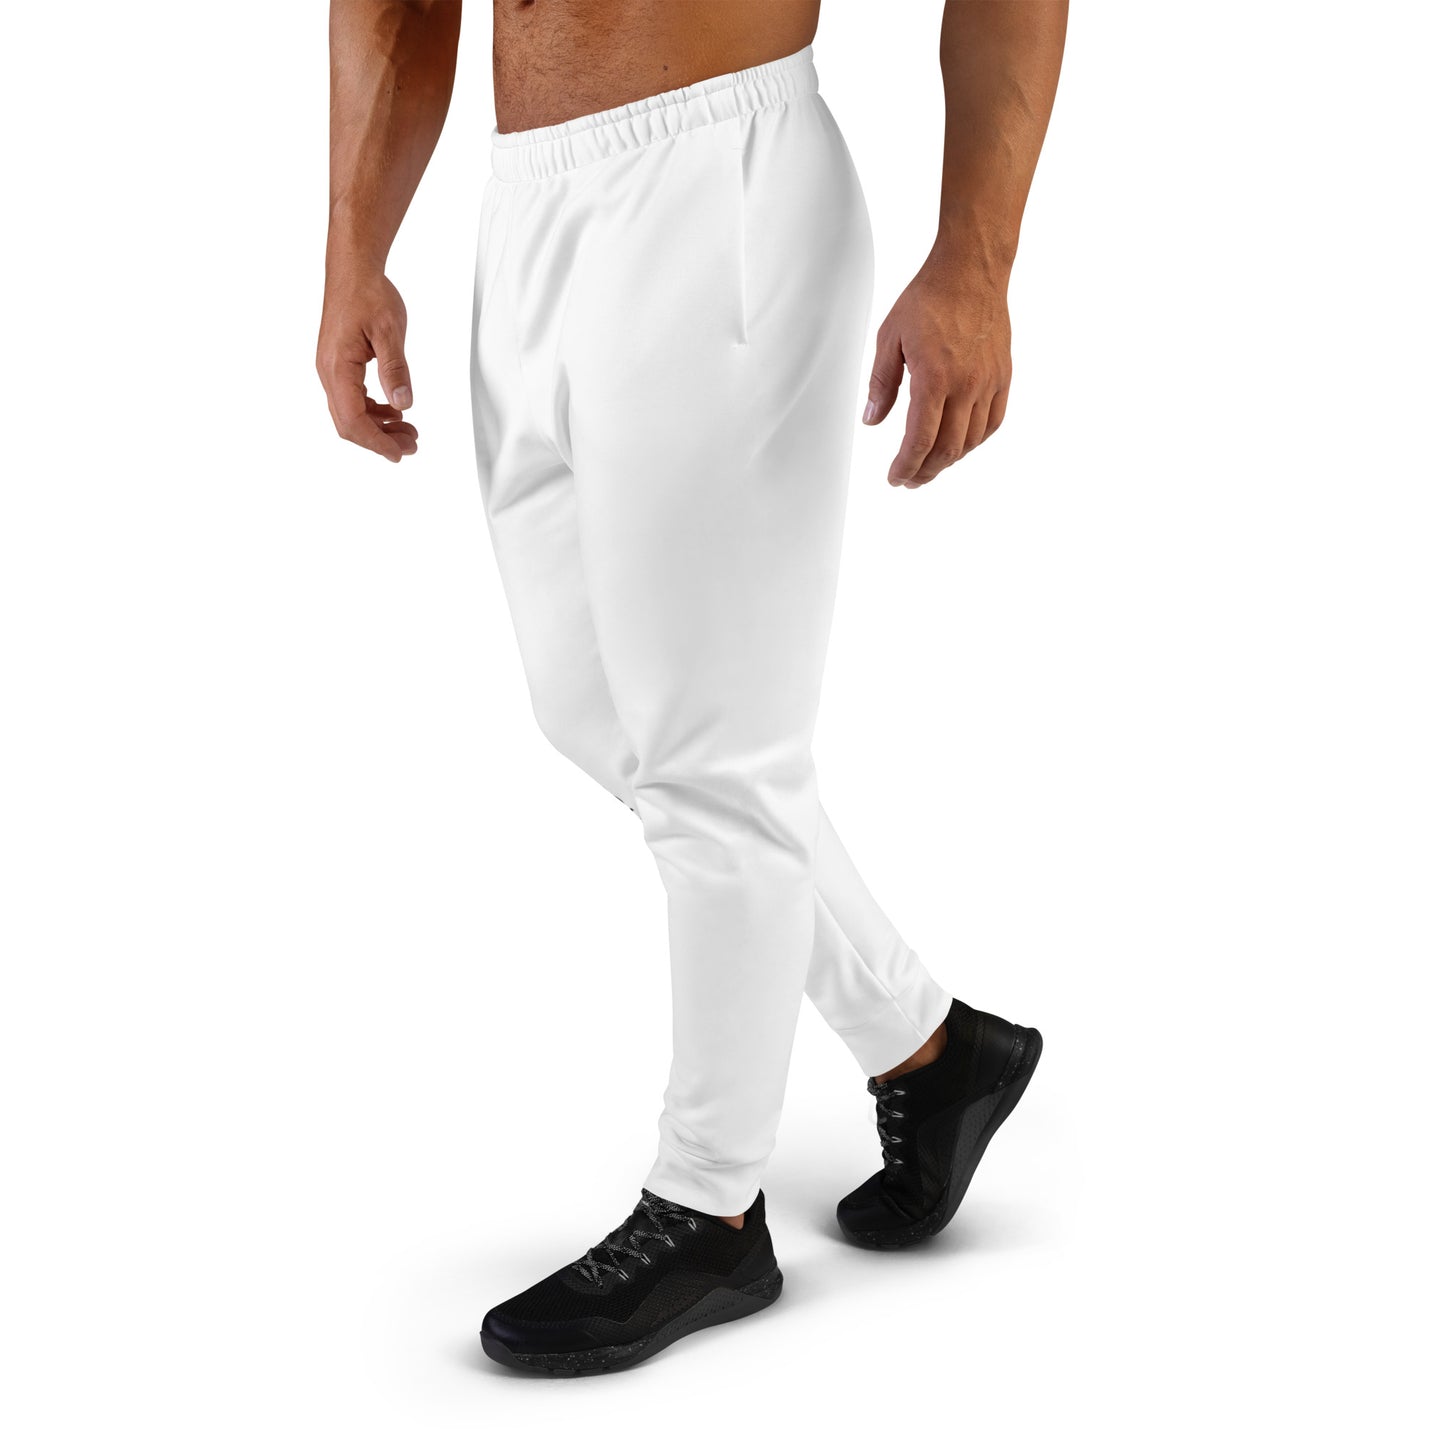 Souletics® All Around Run, Ride and Workout Pant in White